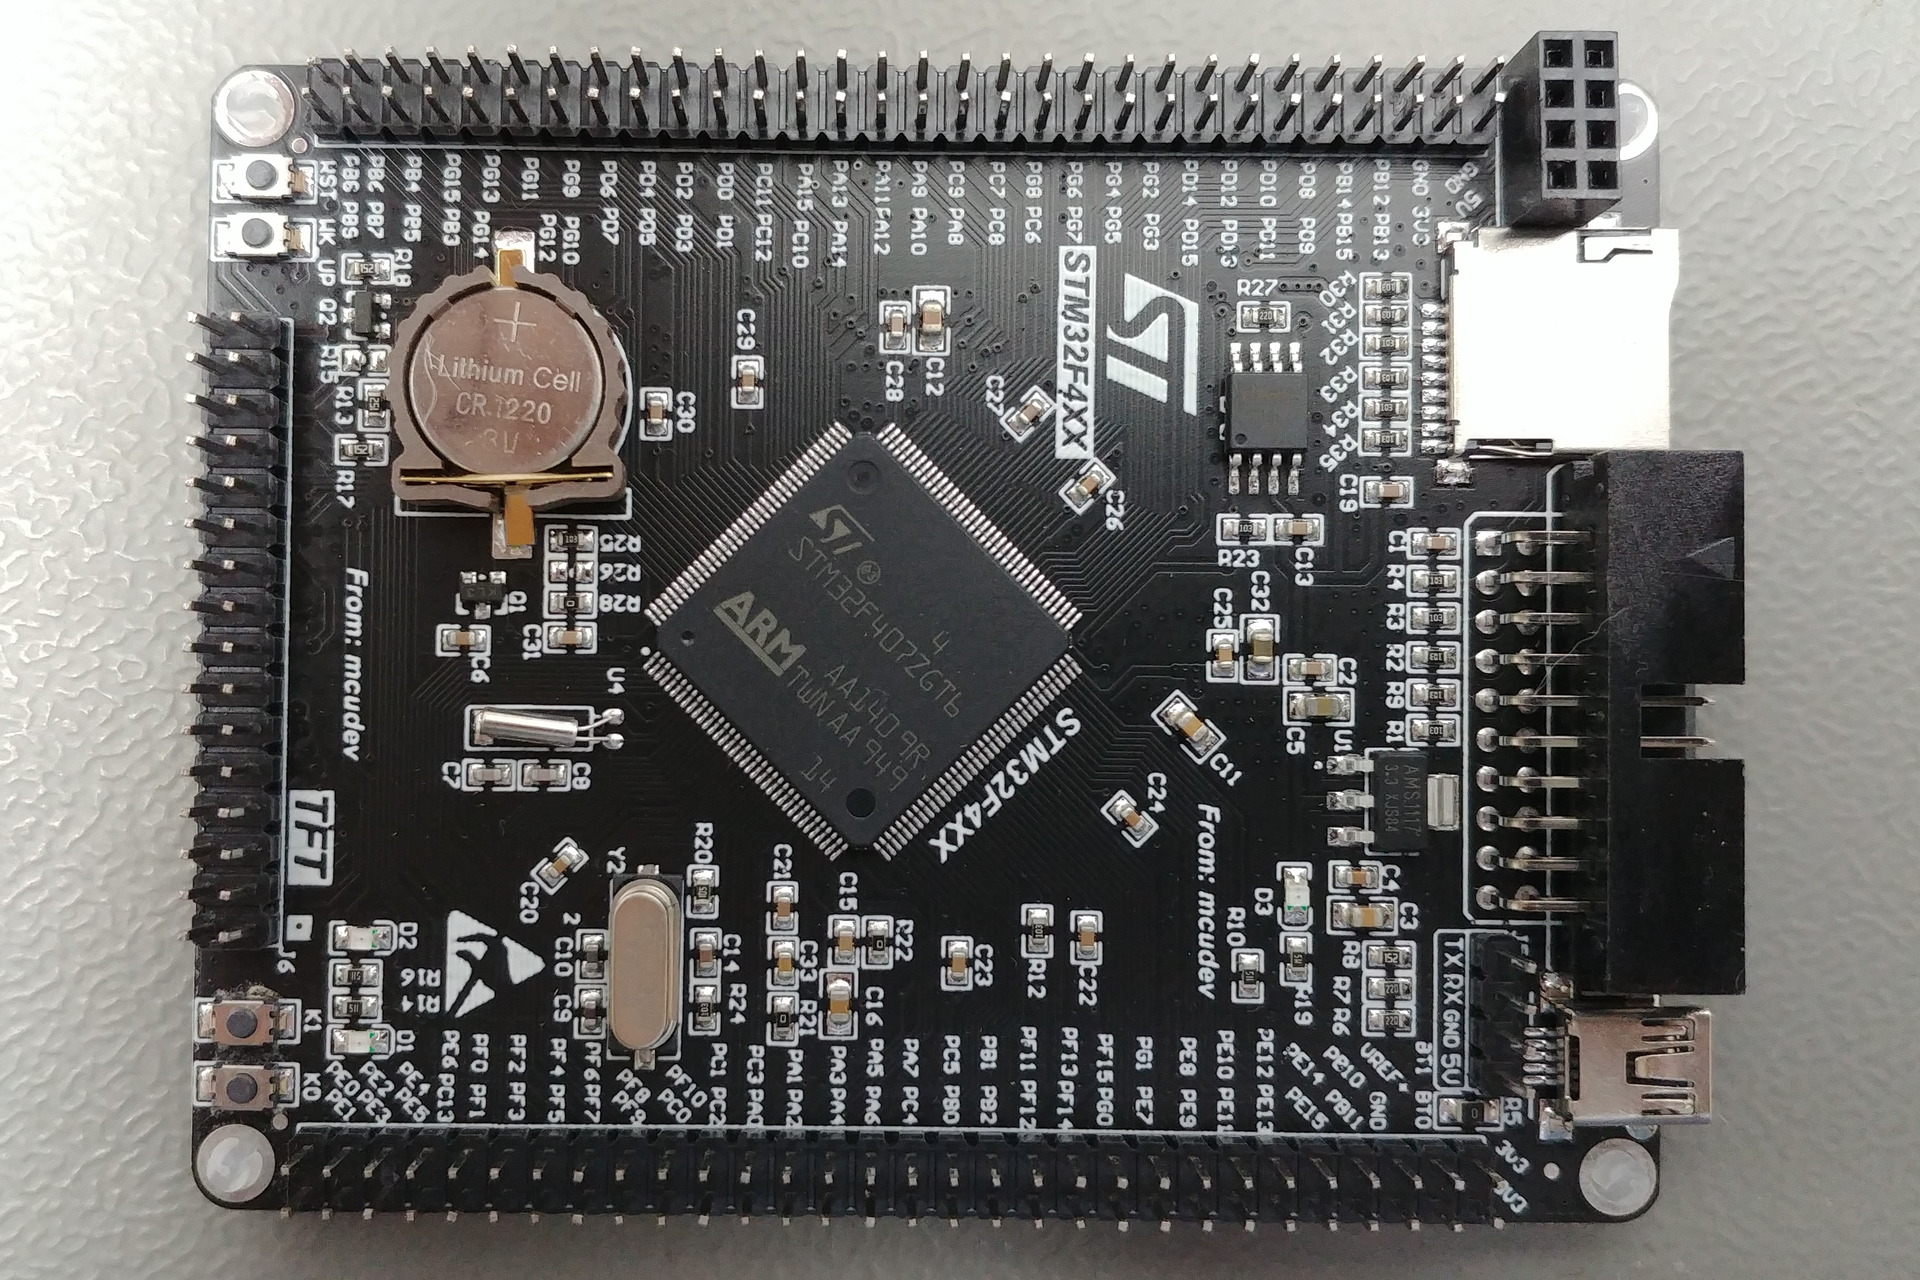 STM32F4XX: Top view